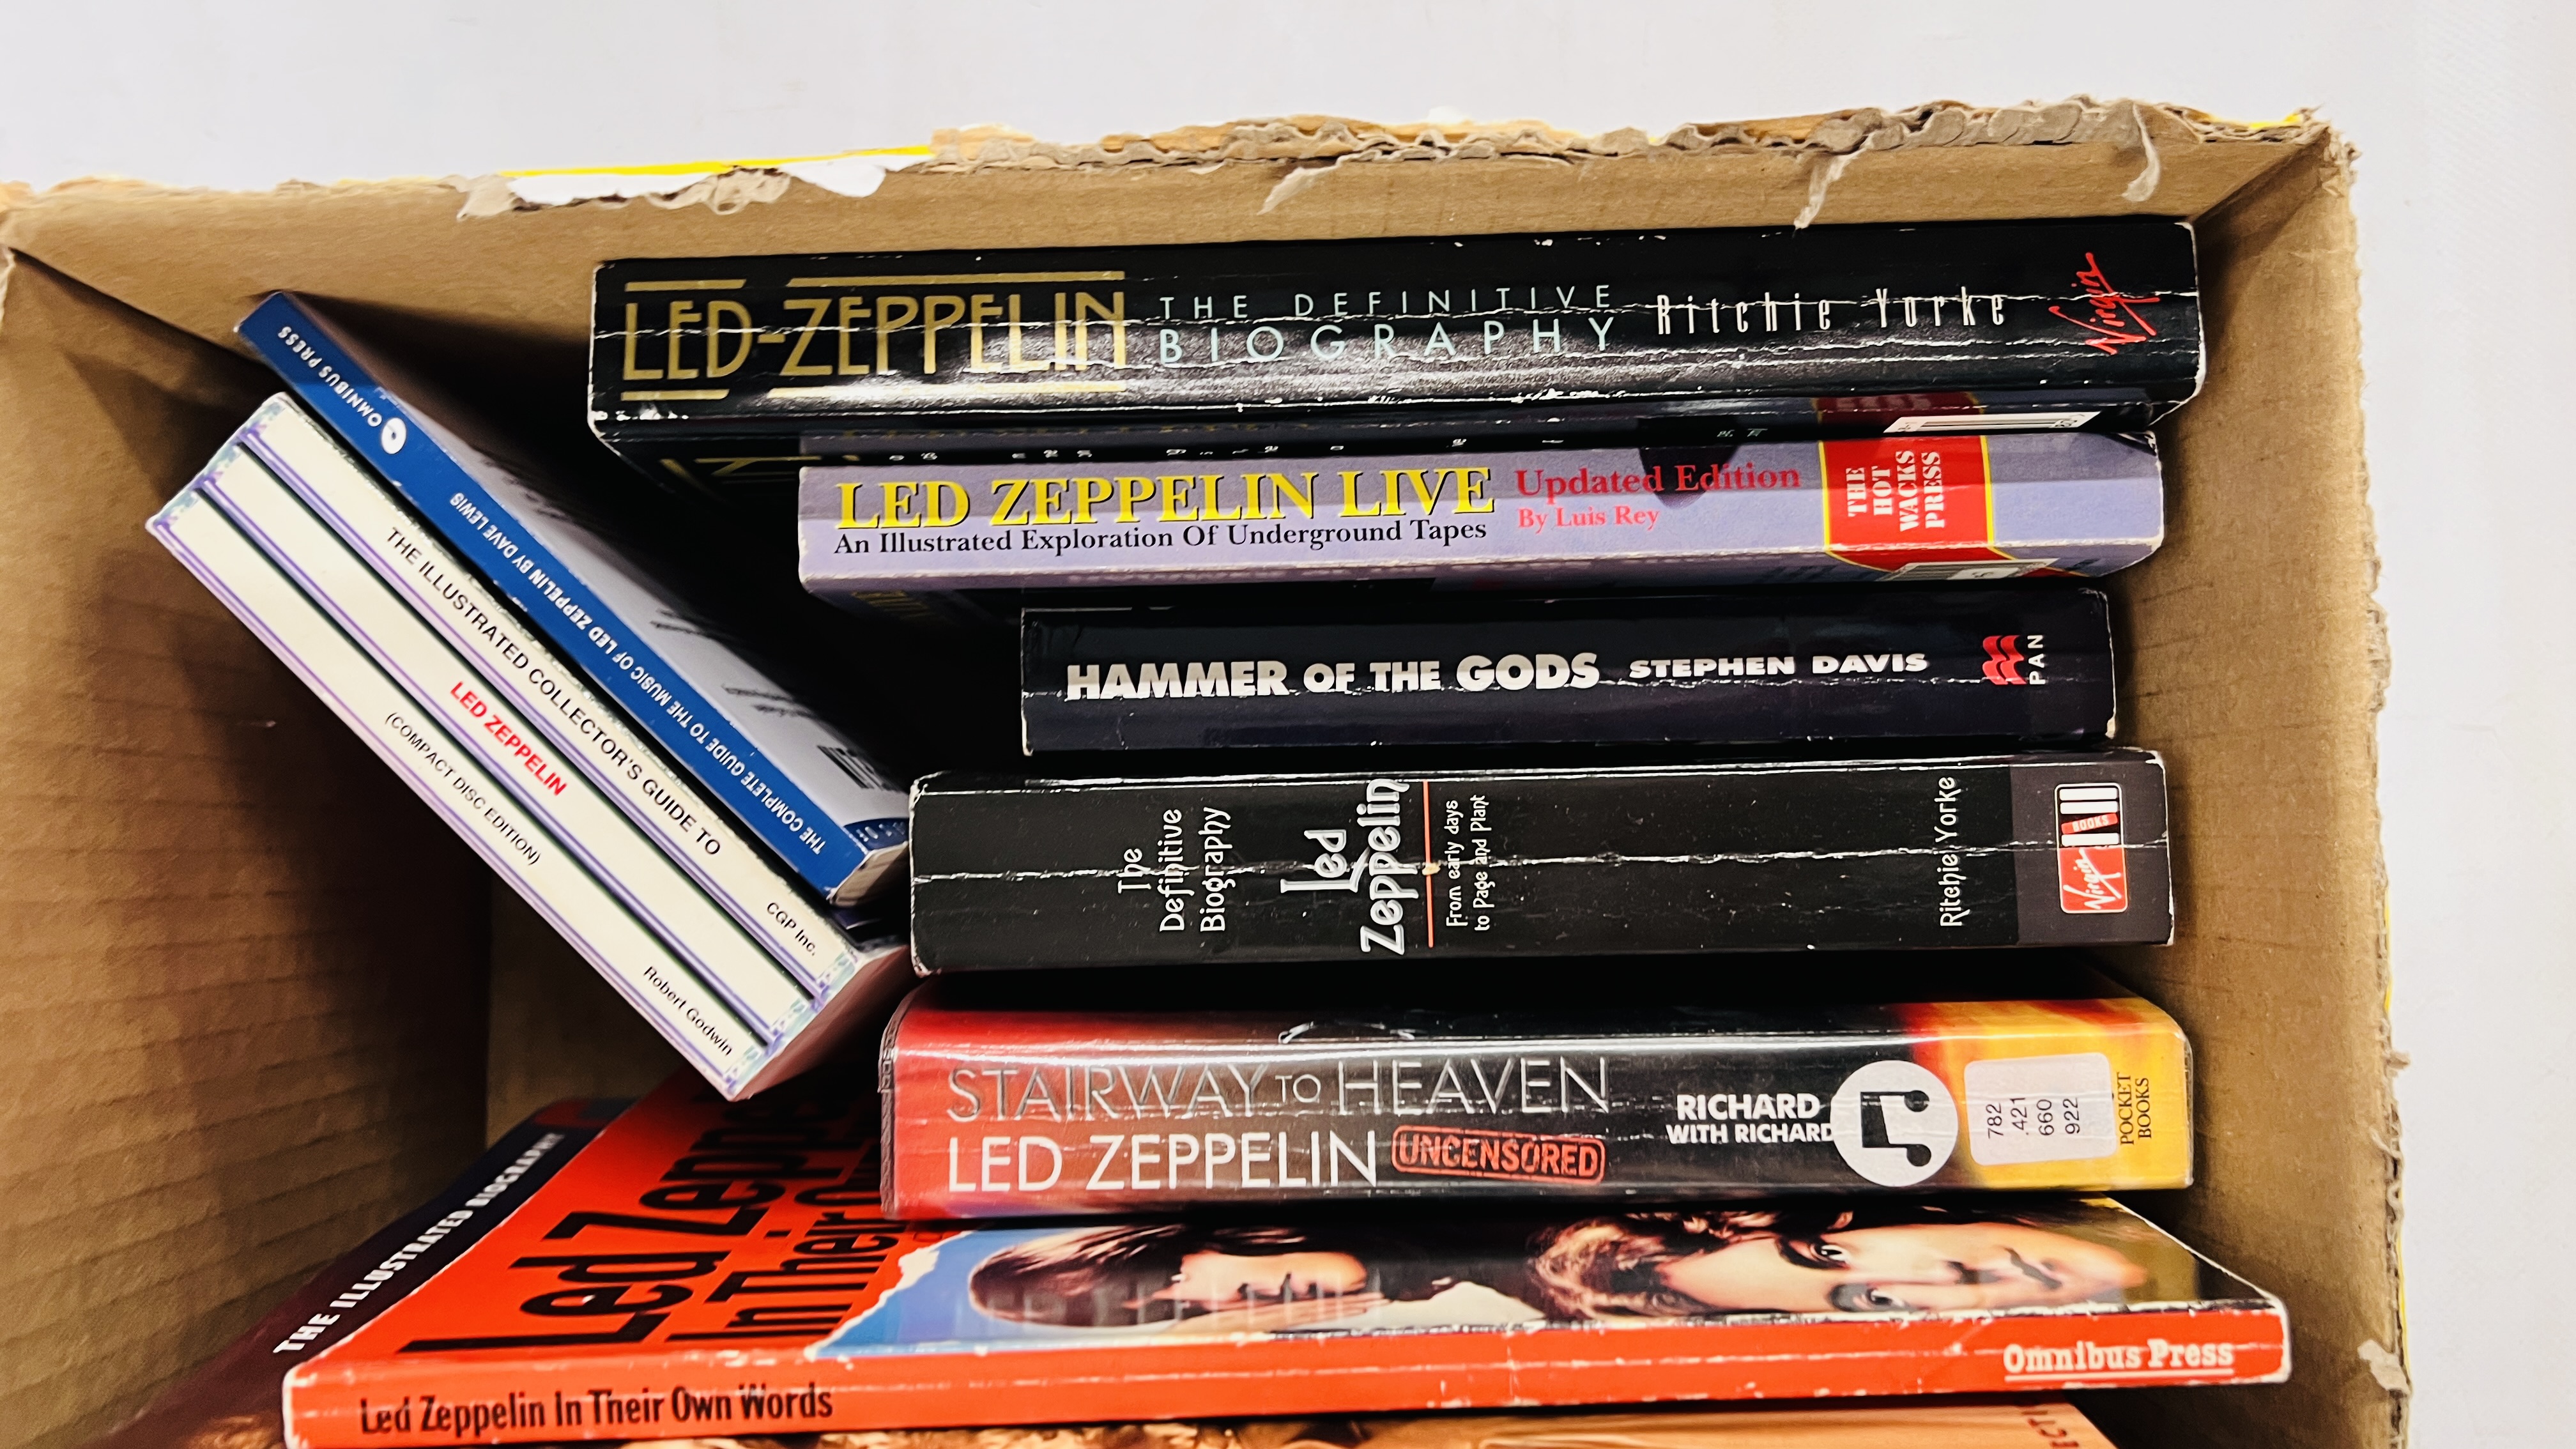 A COLLECTION OF LED ZEPPELIN BOOKS TO INCLUDE ILLUSTRATED BIOGRAPH, TREASURES OF LED ZEPPELIN, - Image 2 of 3